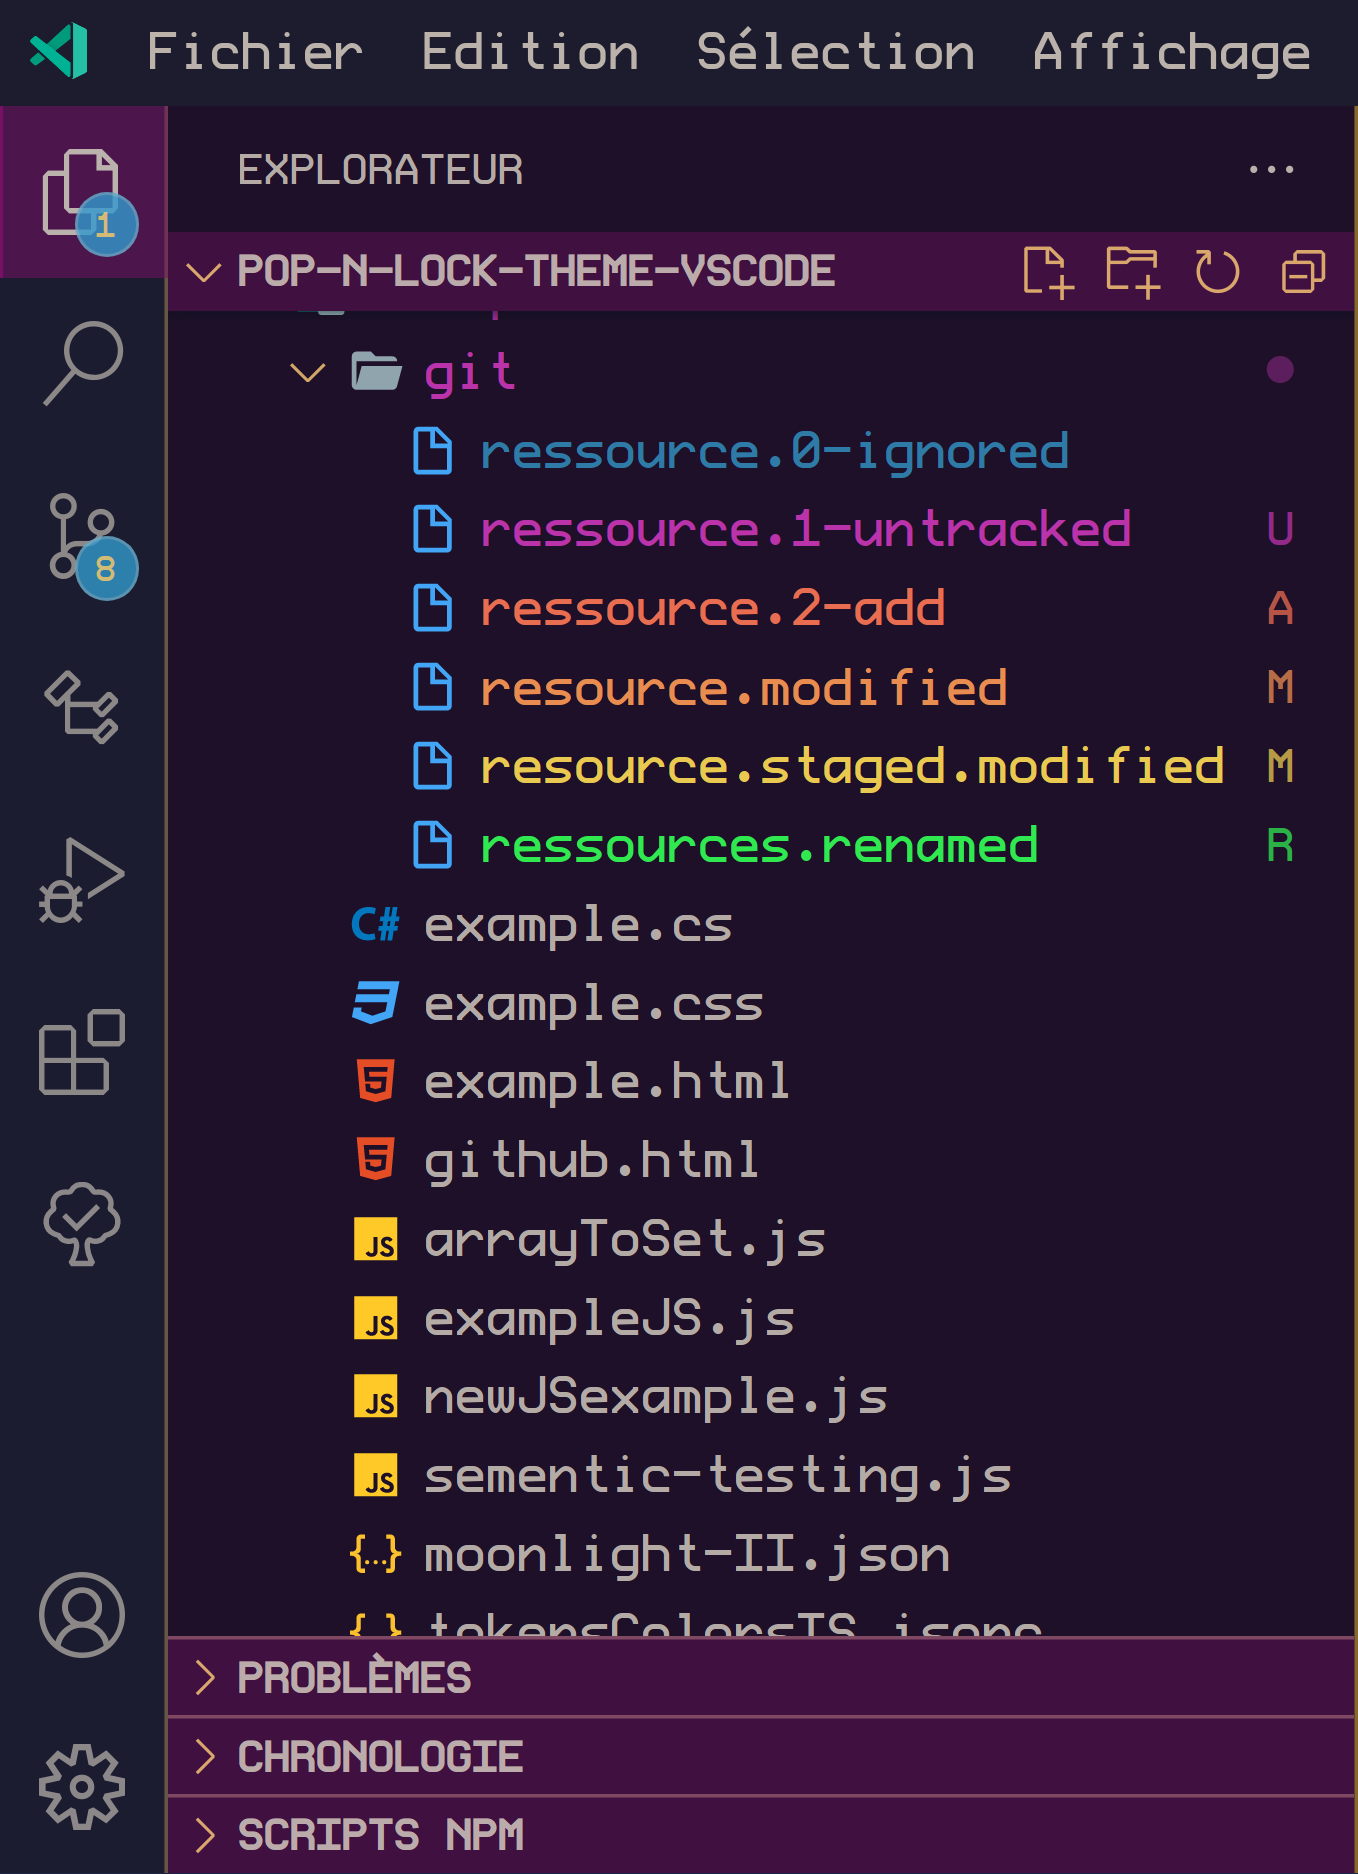 [Git Decorations Colors: Ignored, Untracked, Added, Modified, Modified Staged, Renamed]